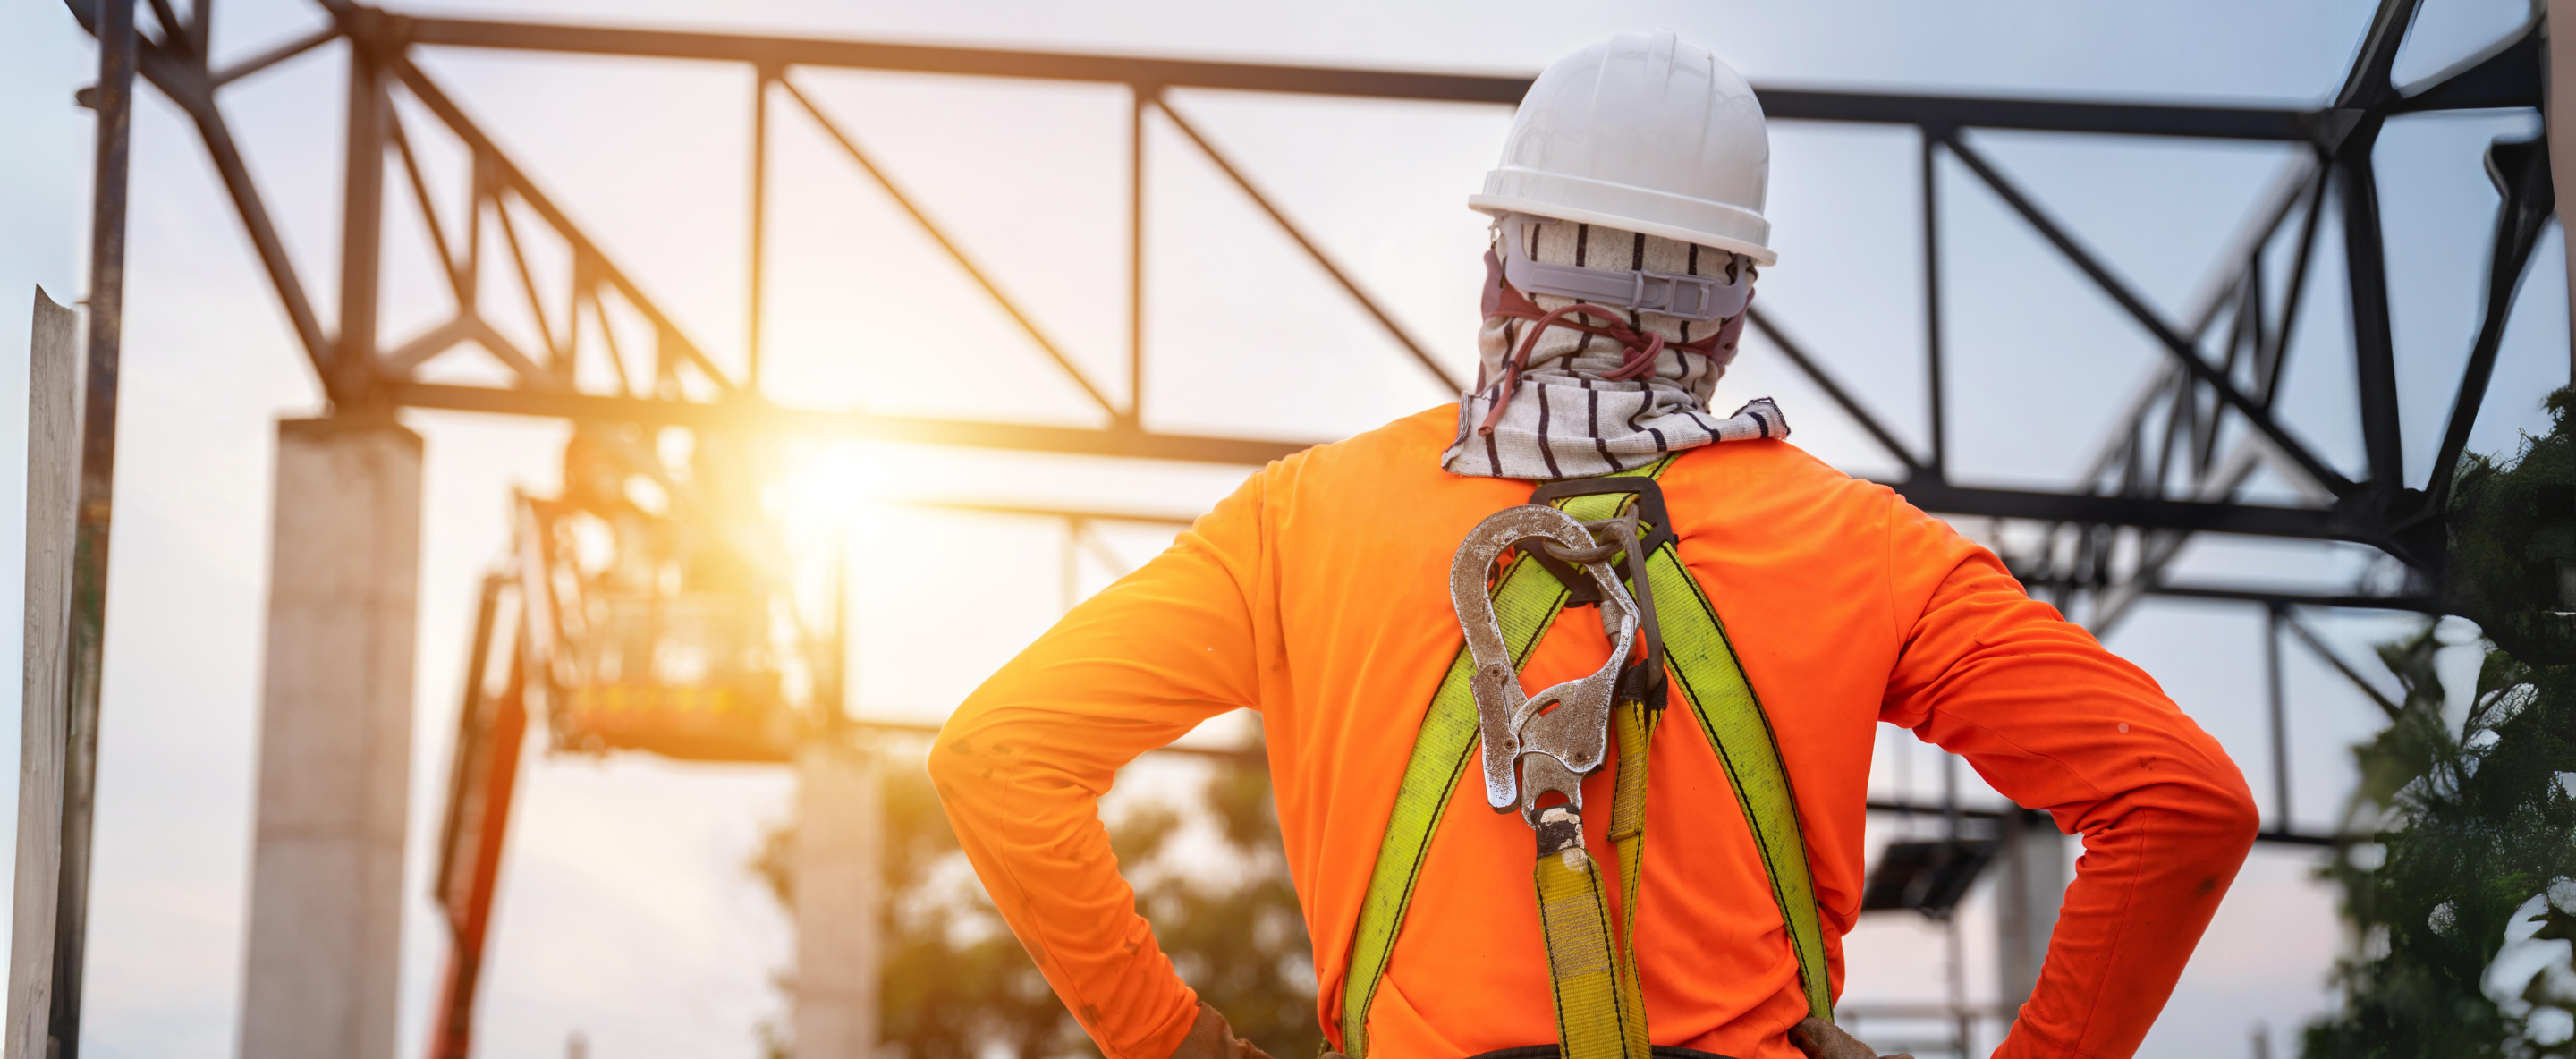 How to Ensure Workplace Safety with Fall Protection Equipment 